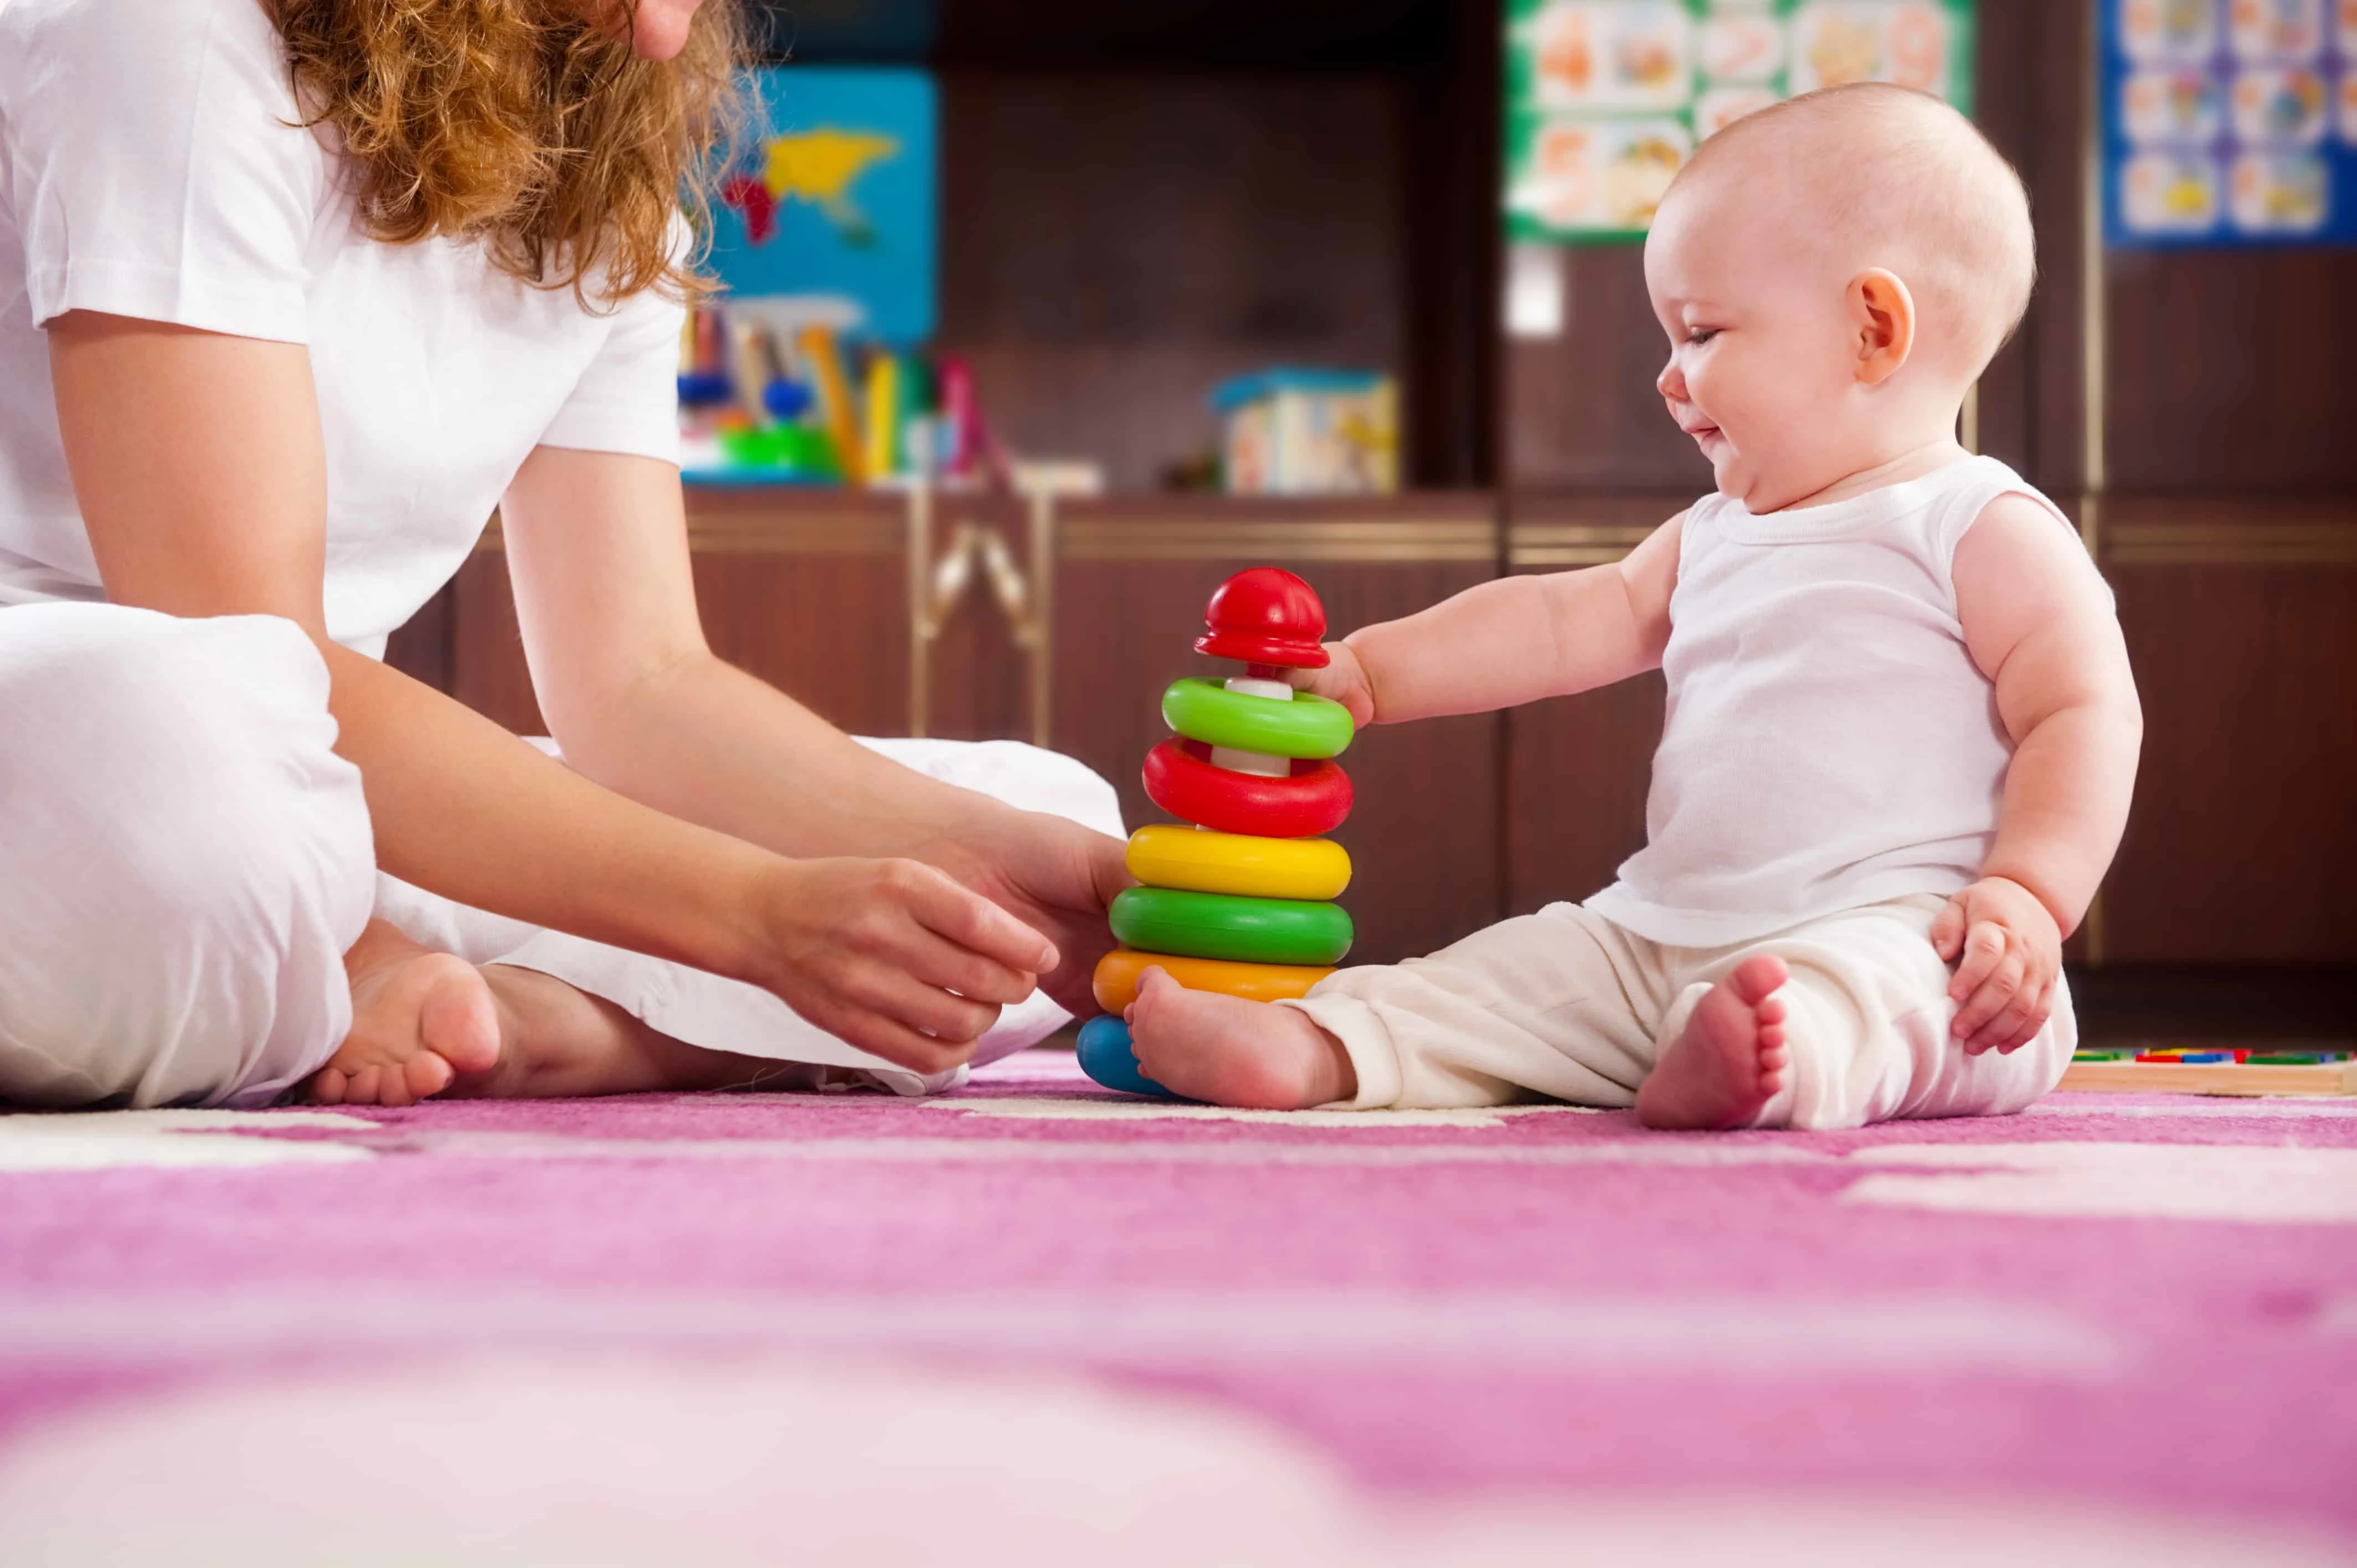 Are you looking for ways to increase your baby's motor skills? Try these simple ways to get them playing and refining motor skills.